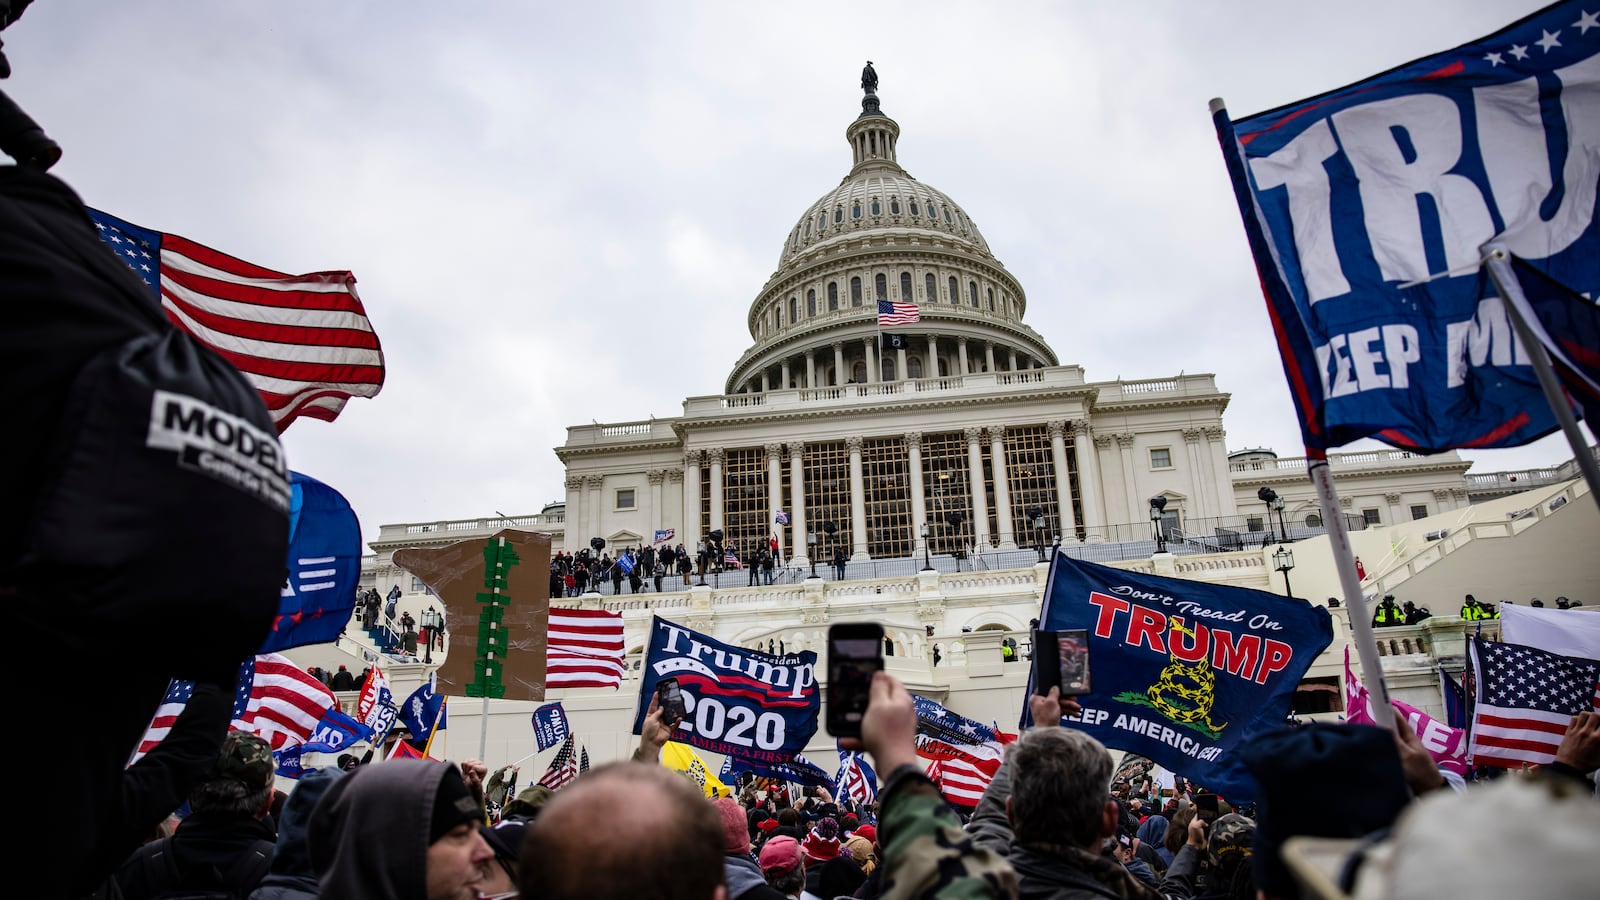 Rioters with Trump flags descend on the U.S. Capitol on January 6, 2021.